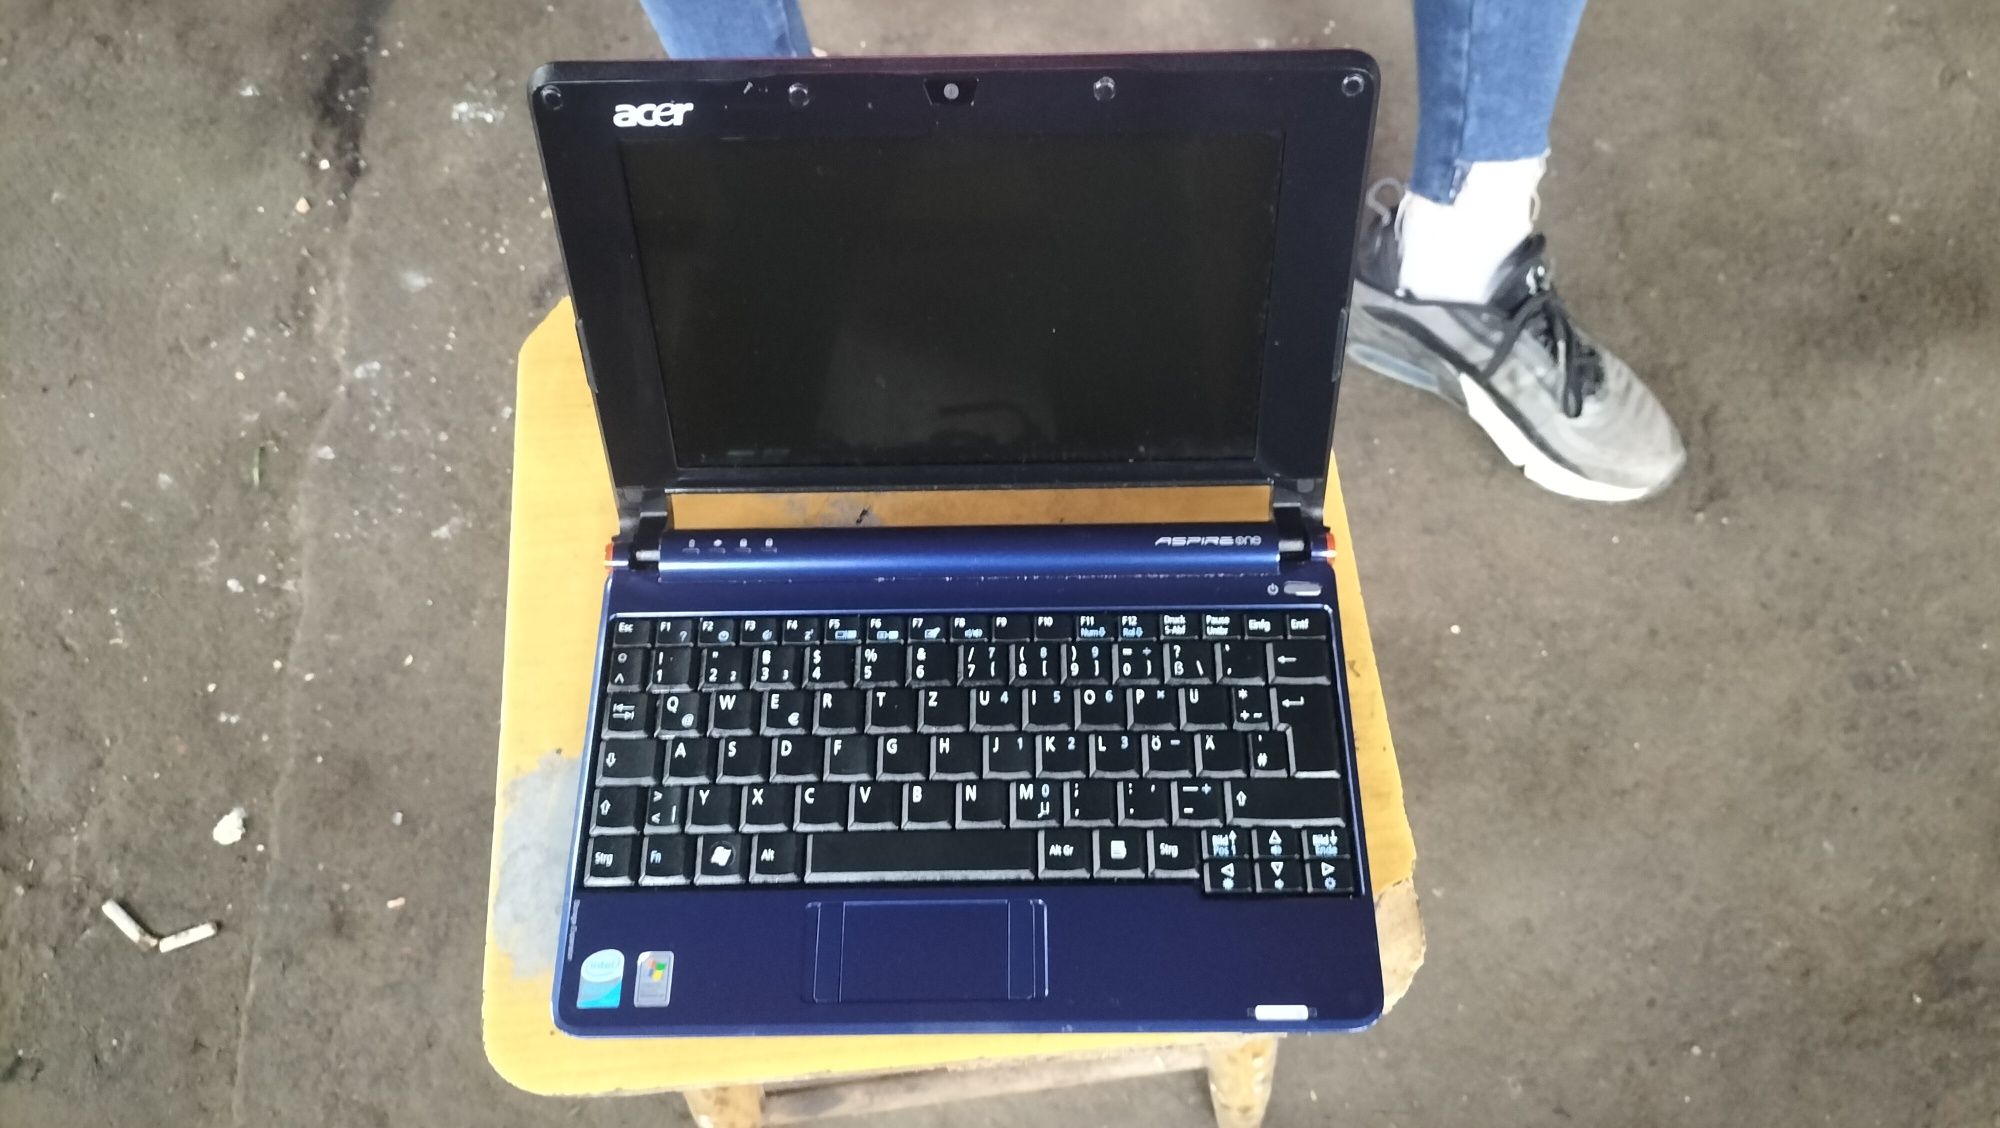 Laptop Acer aspire one